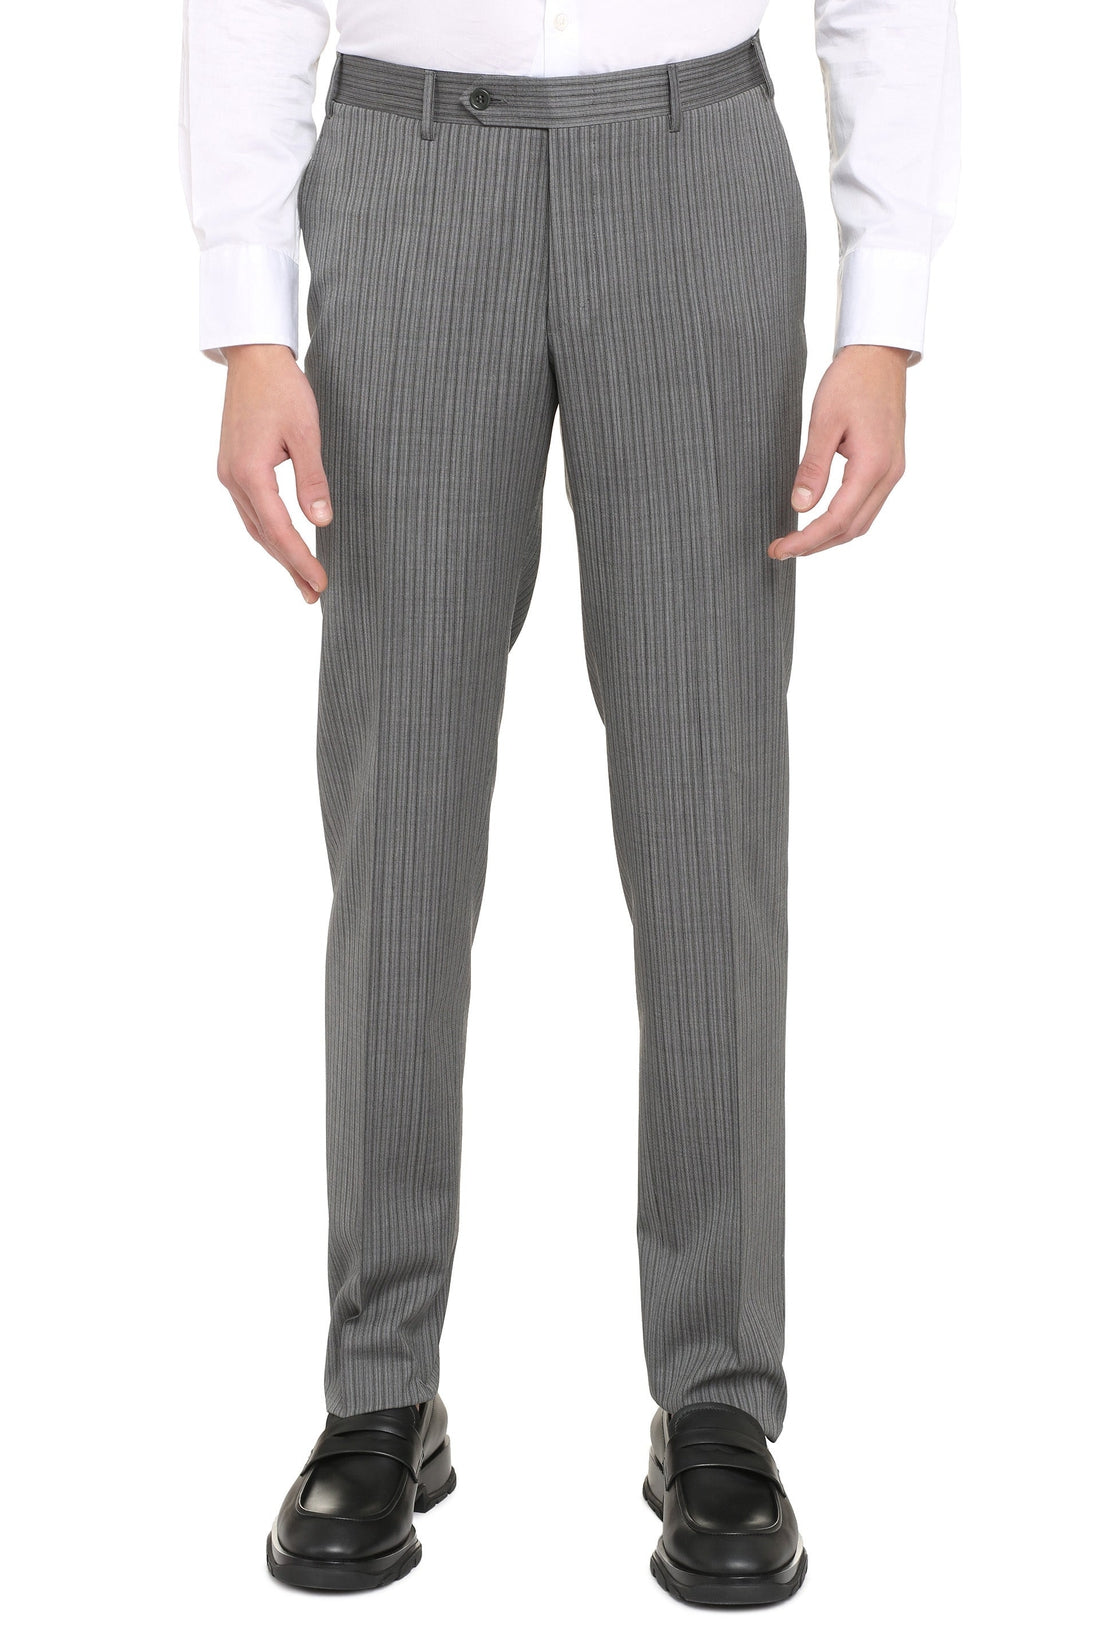 Canali-OUTLET-SALE-Tailored wool trousers-ARCHIVIST